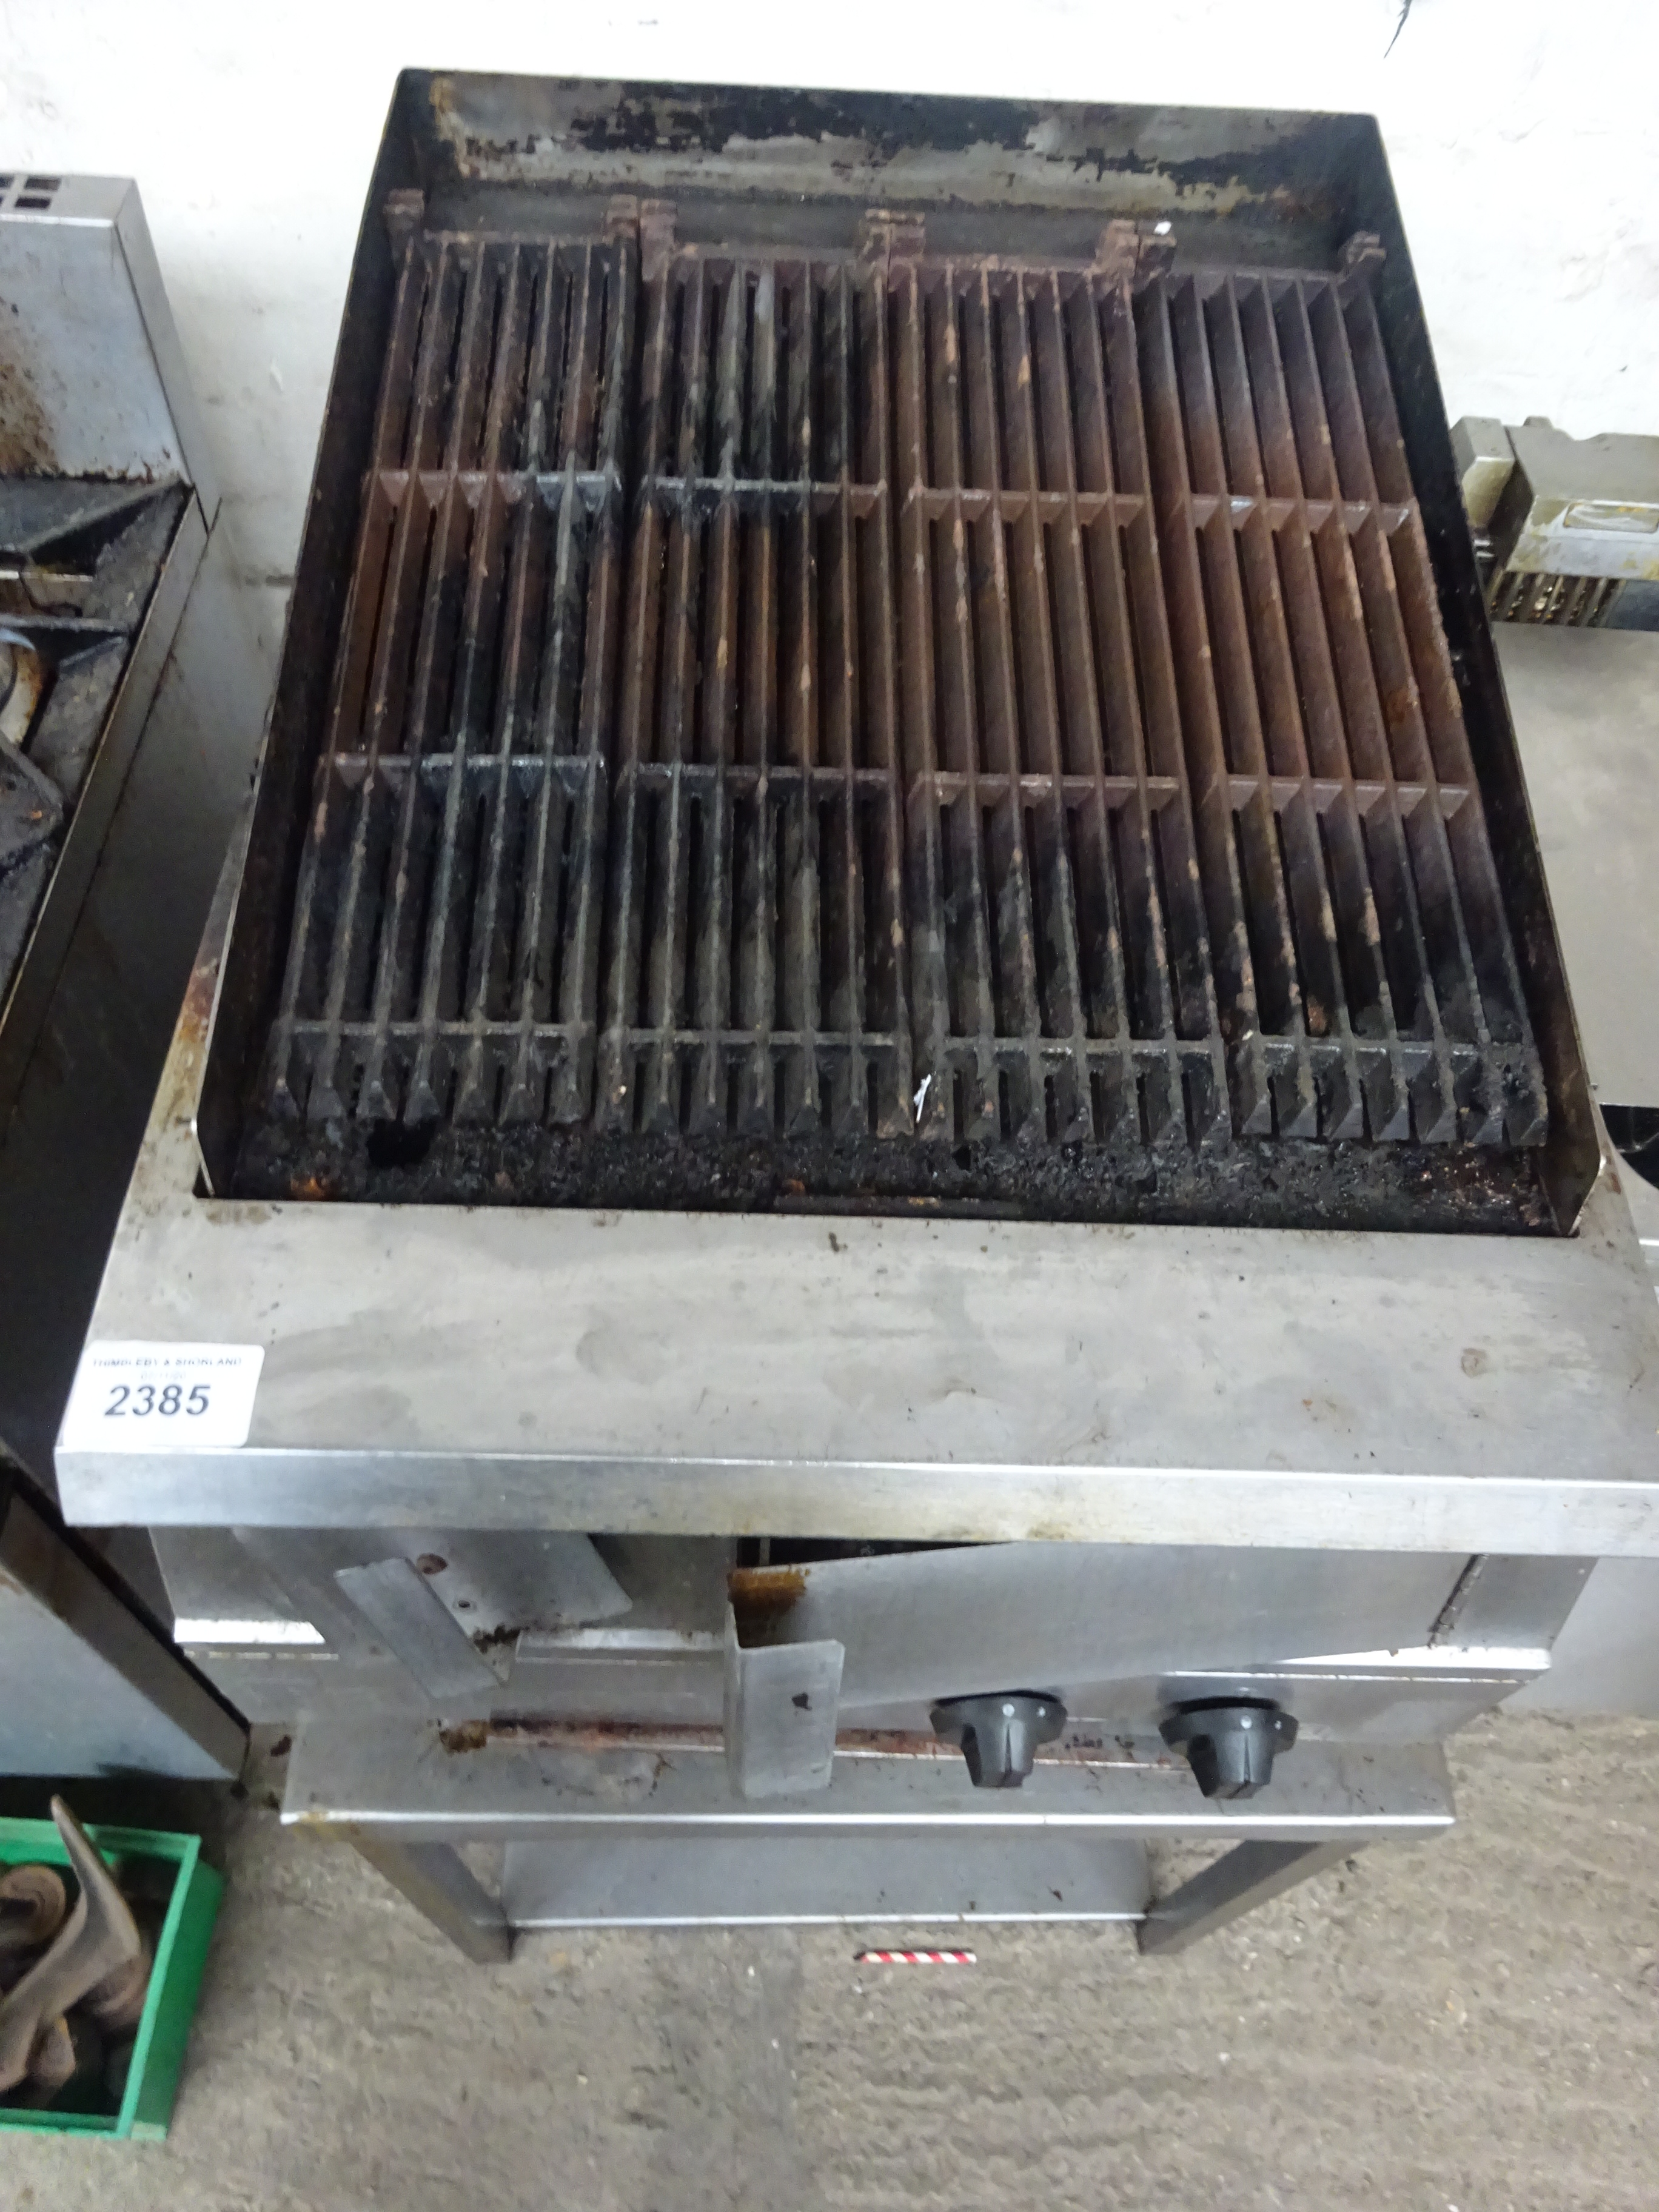 2 burner chargrill on stand - Image 2 of 2